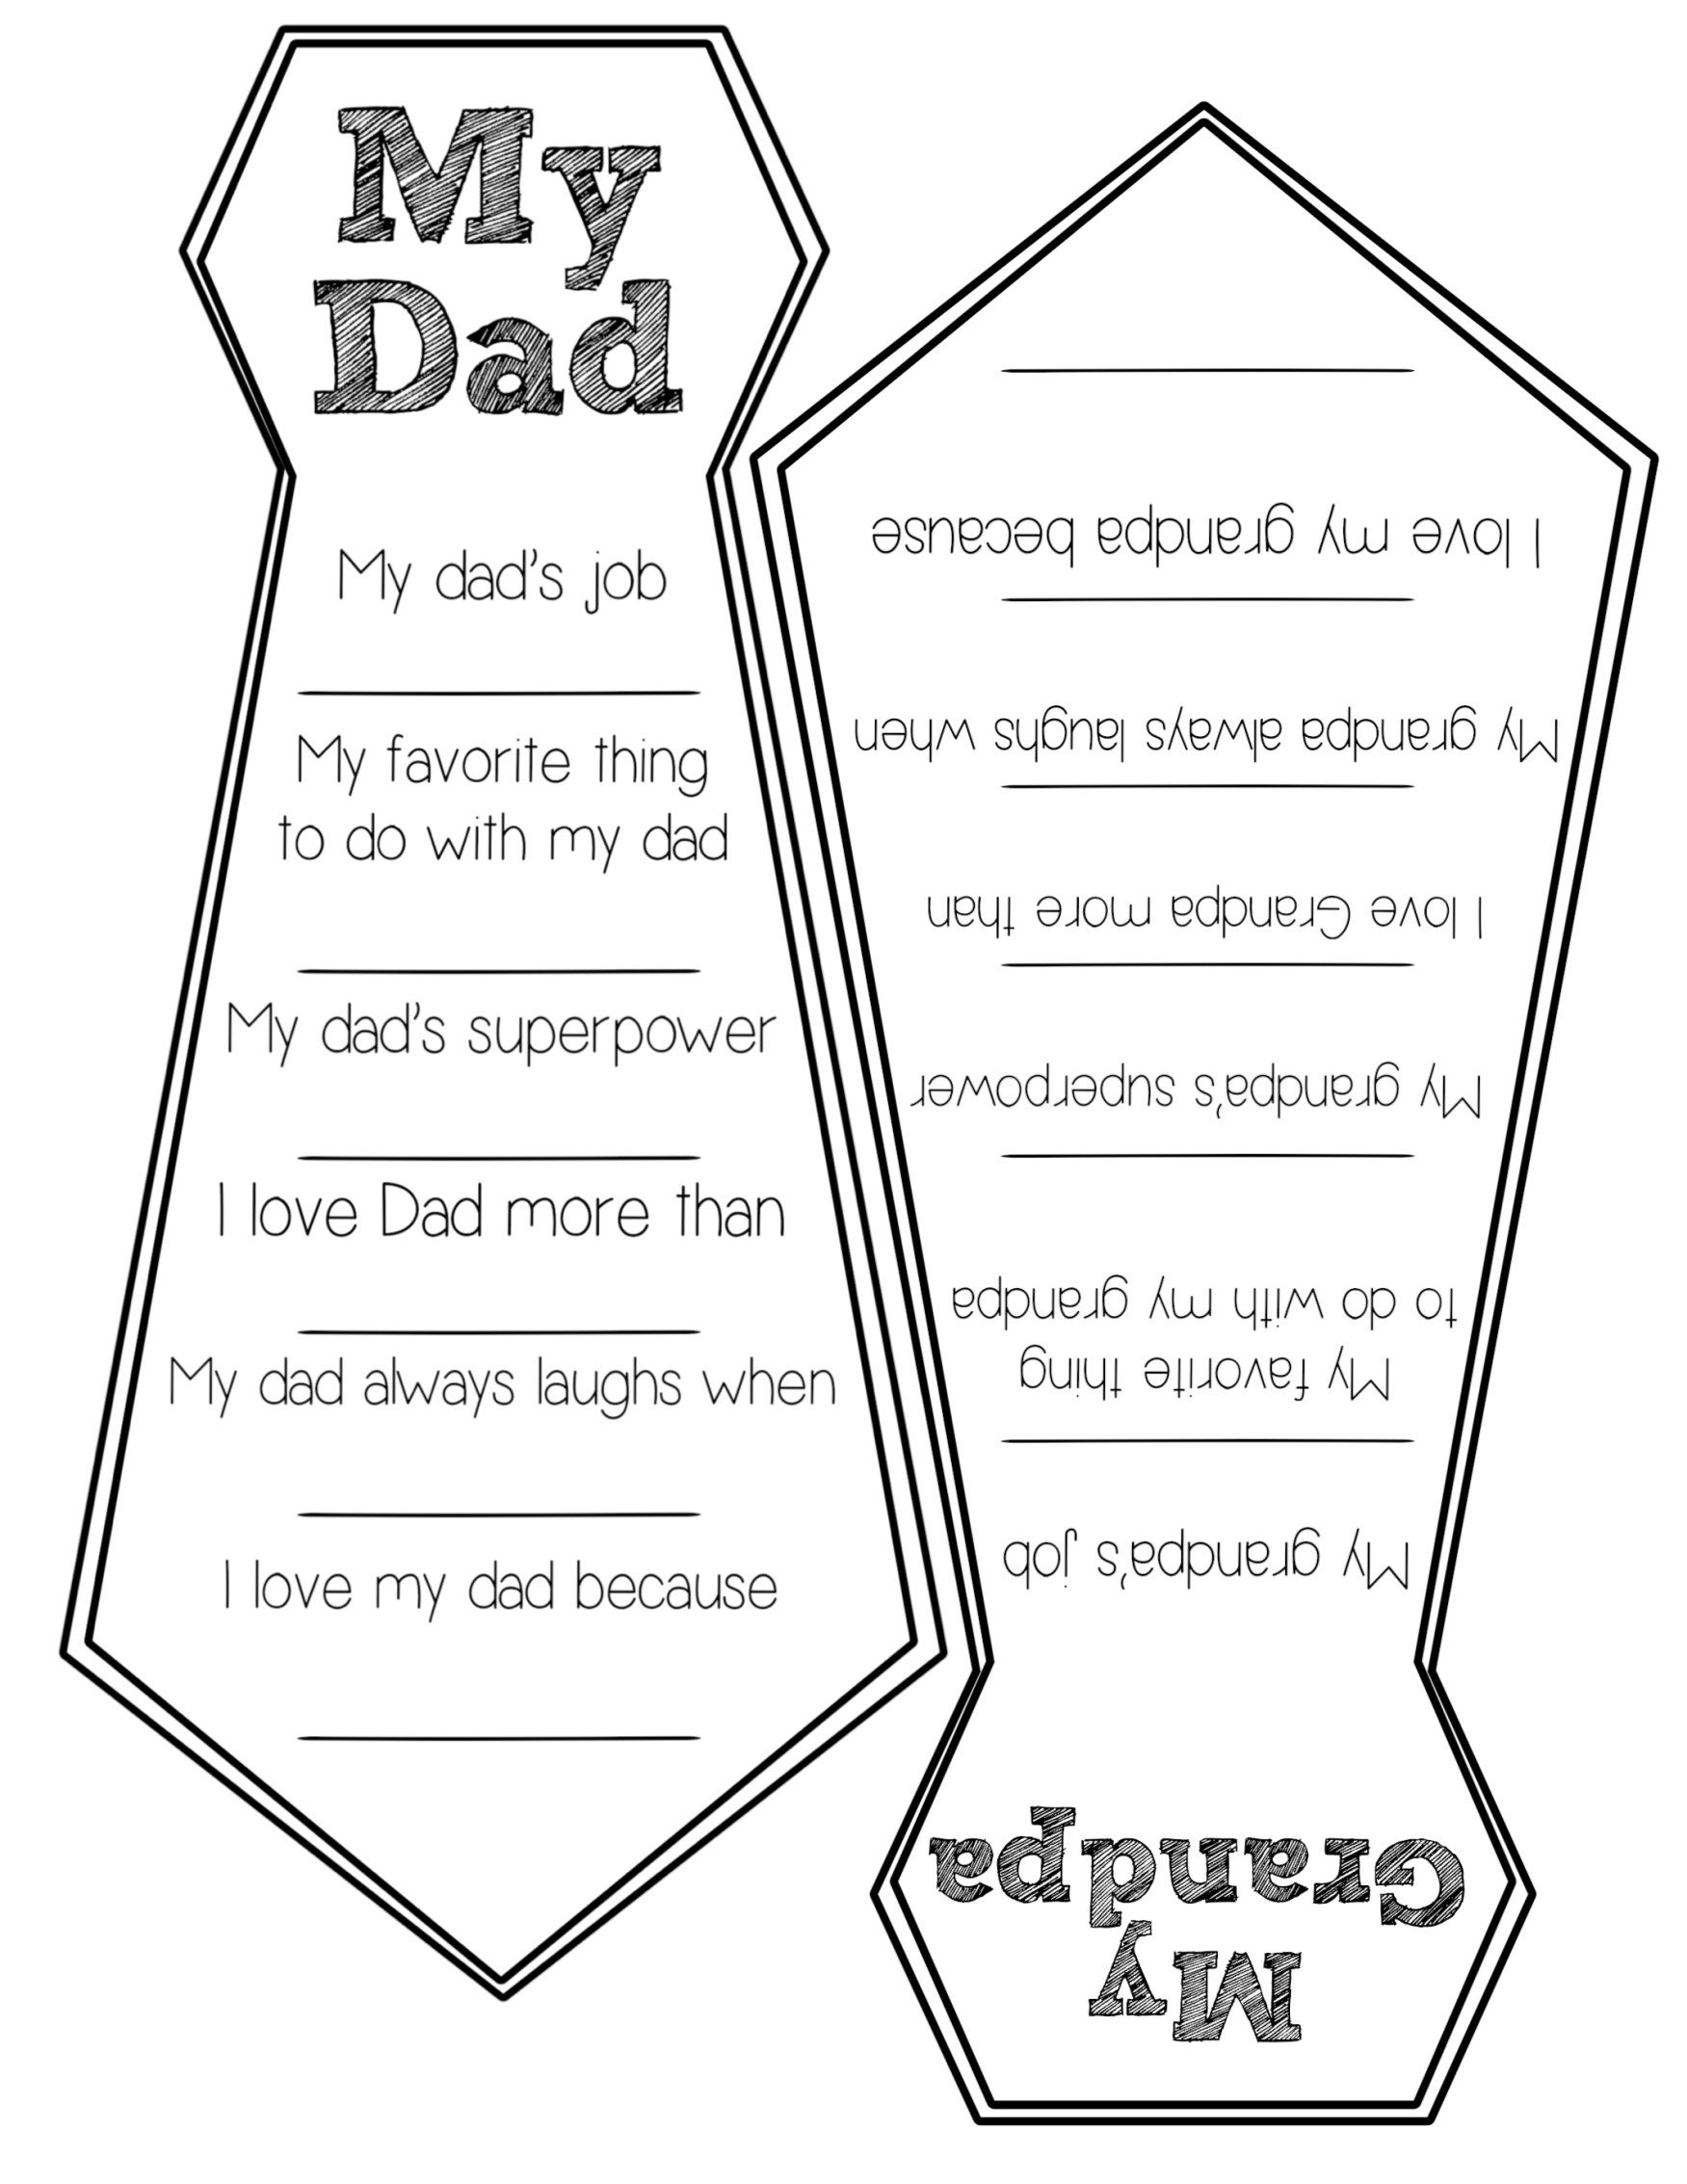 Father&amp;#039;s Day Free Printable Cards | Teaching | Pinterest | Father&amp;#039;s - Free Printable Fathers Day Cards For Preschoolers